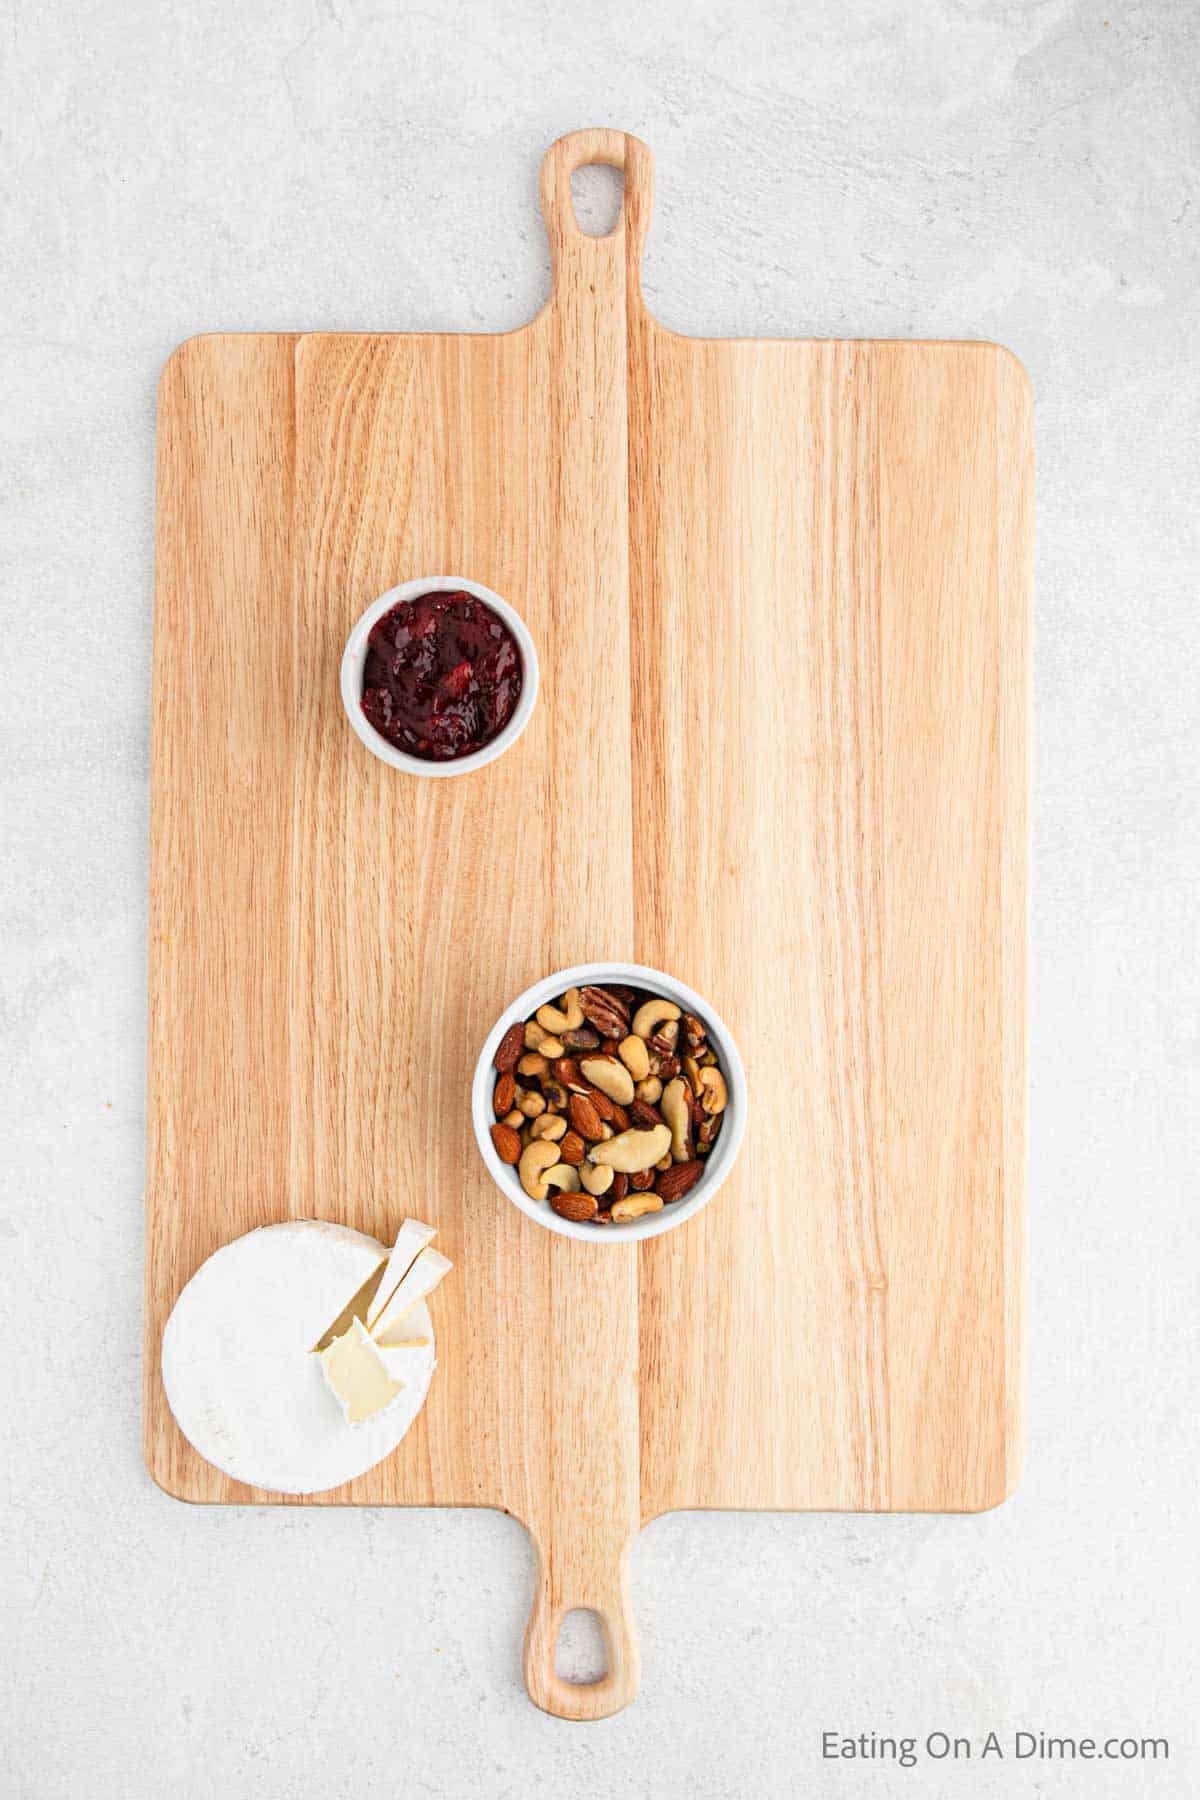 Place bowl of nuts, cheese and jam on the board